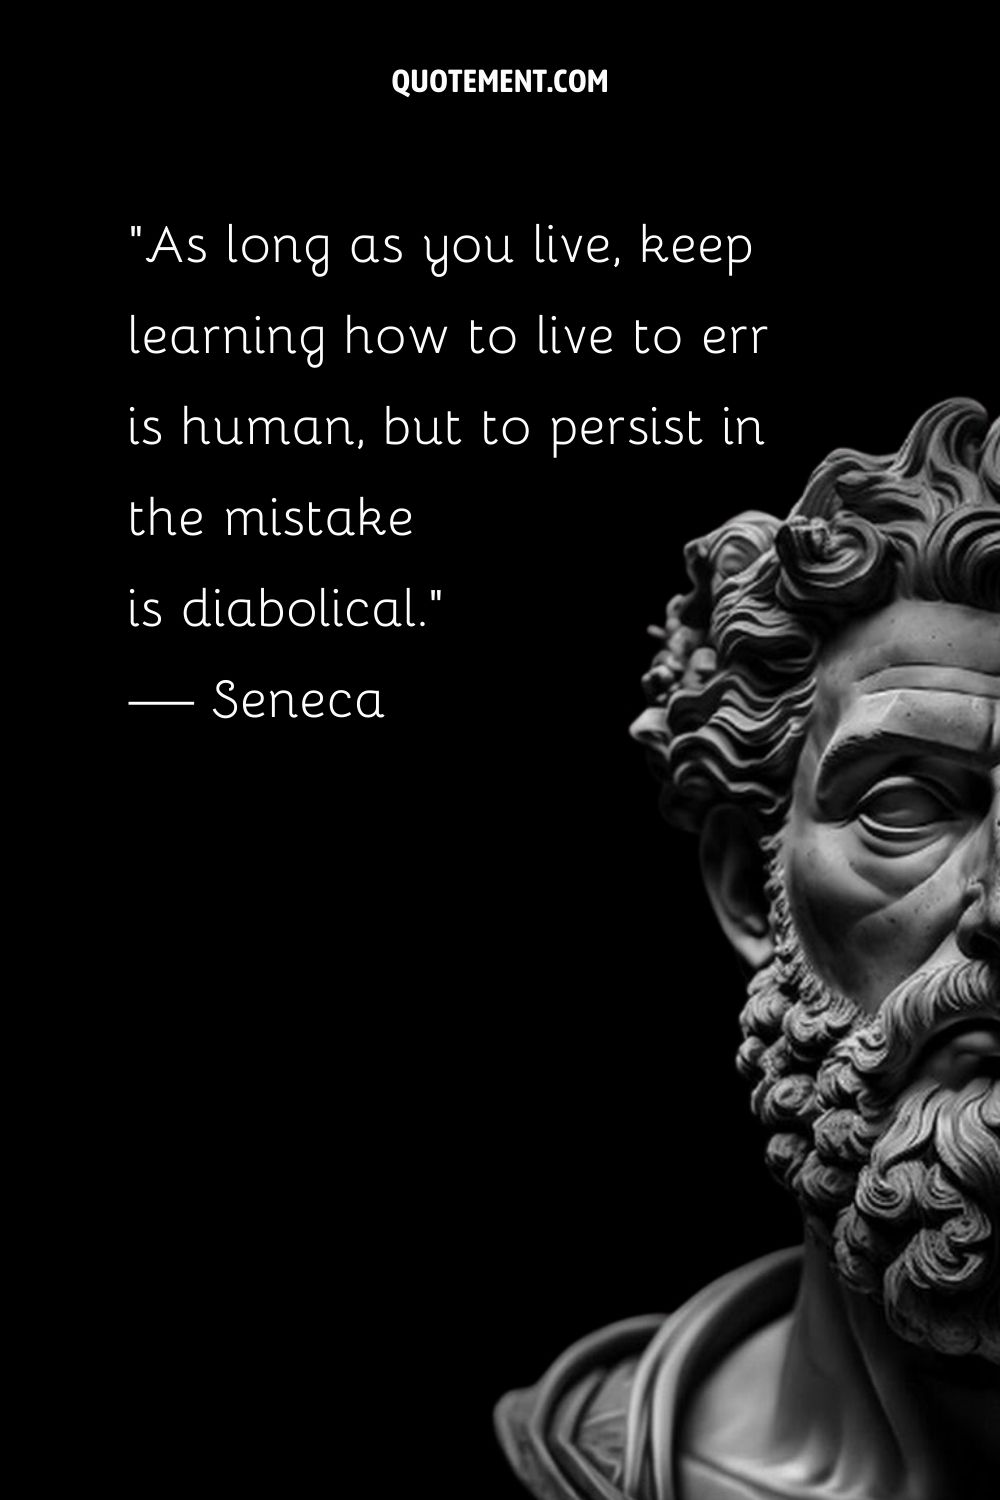 As long as you live, keep learning how to live to err is human, but to persist in the mistake is diabolical.” — Seneca